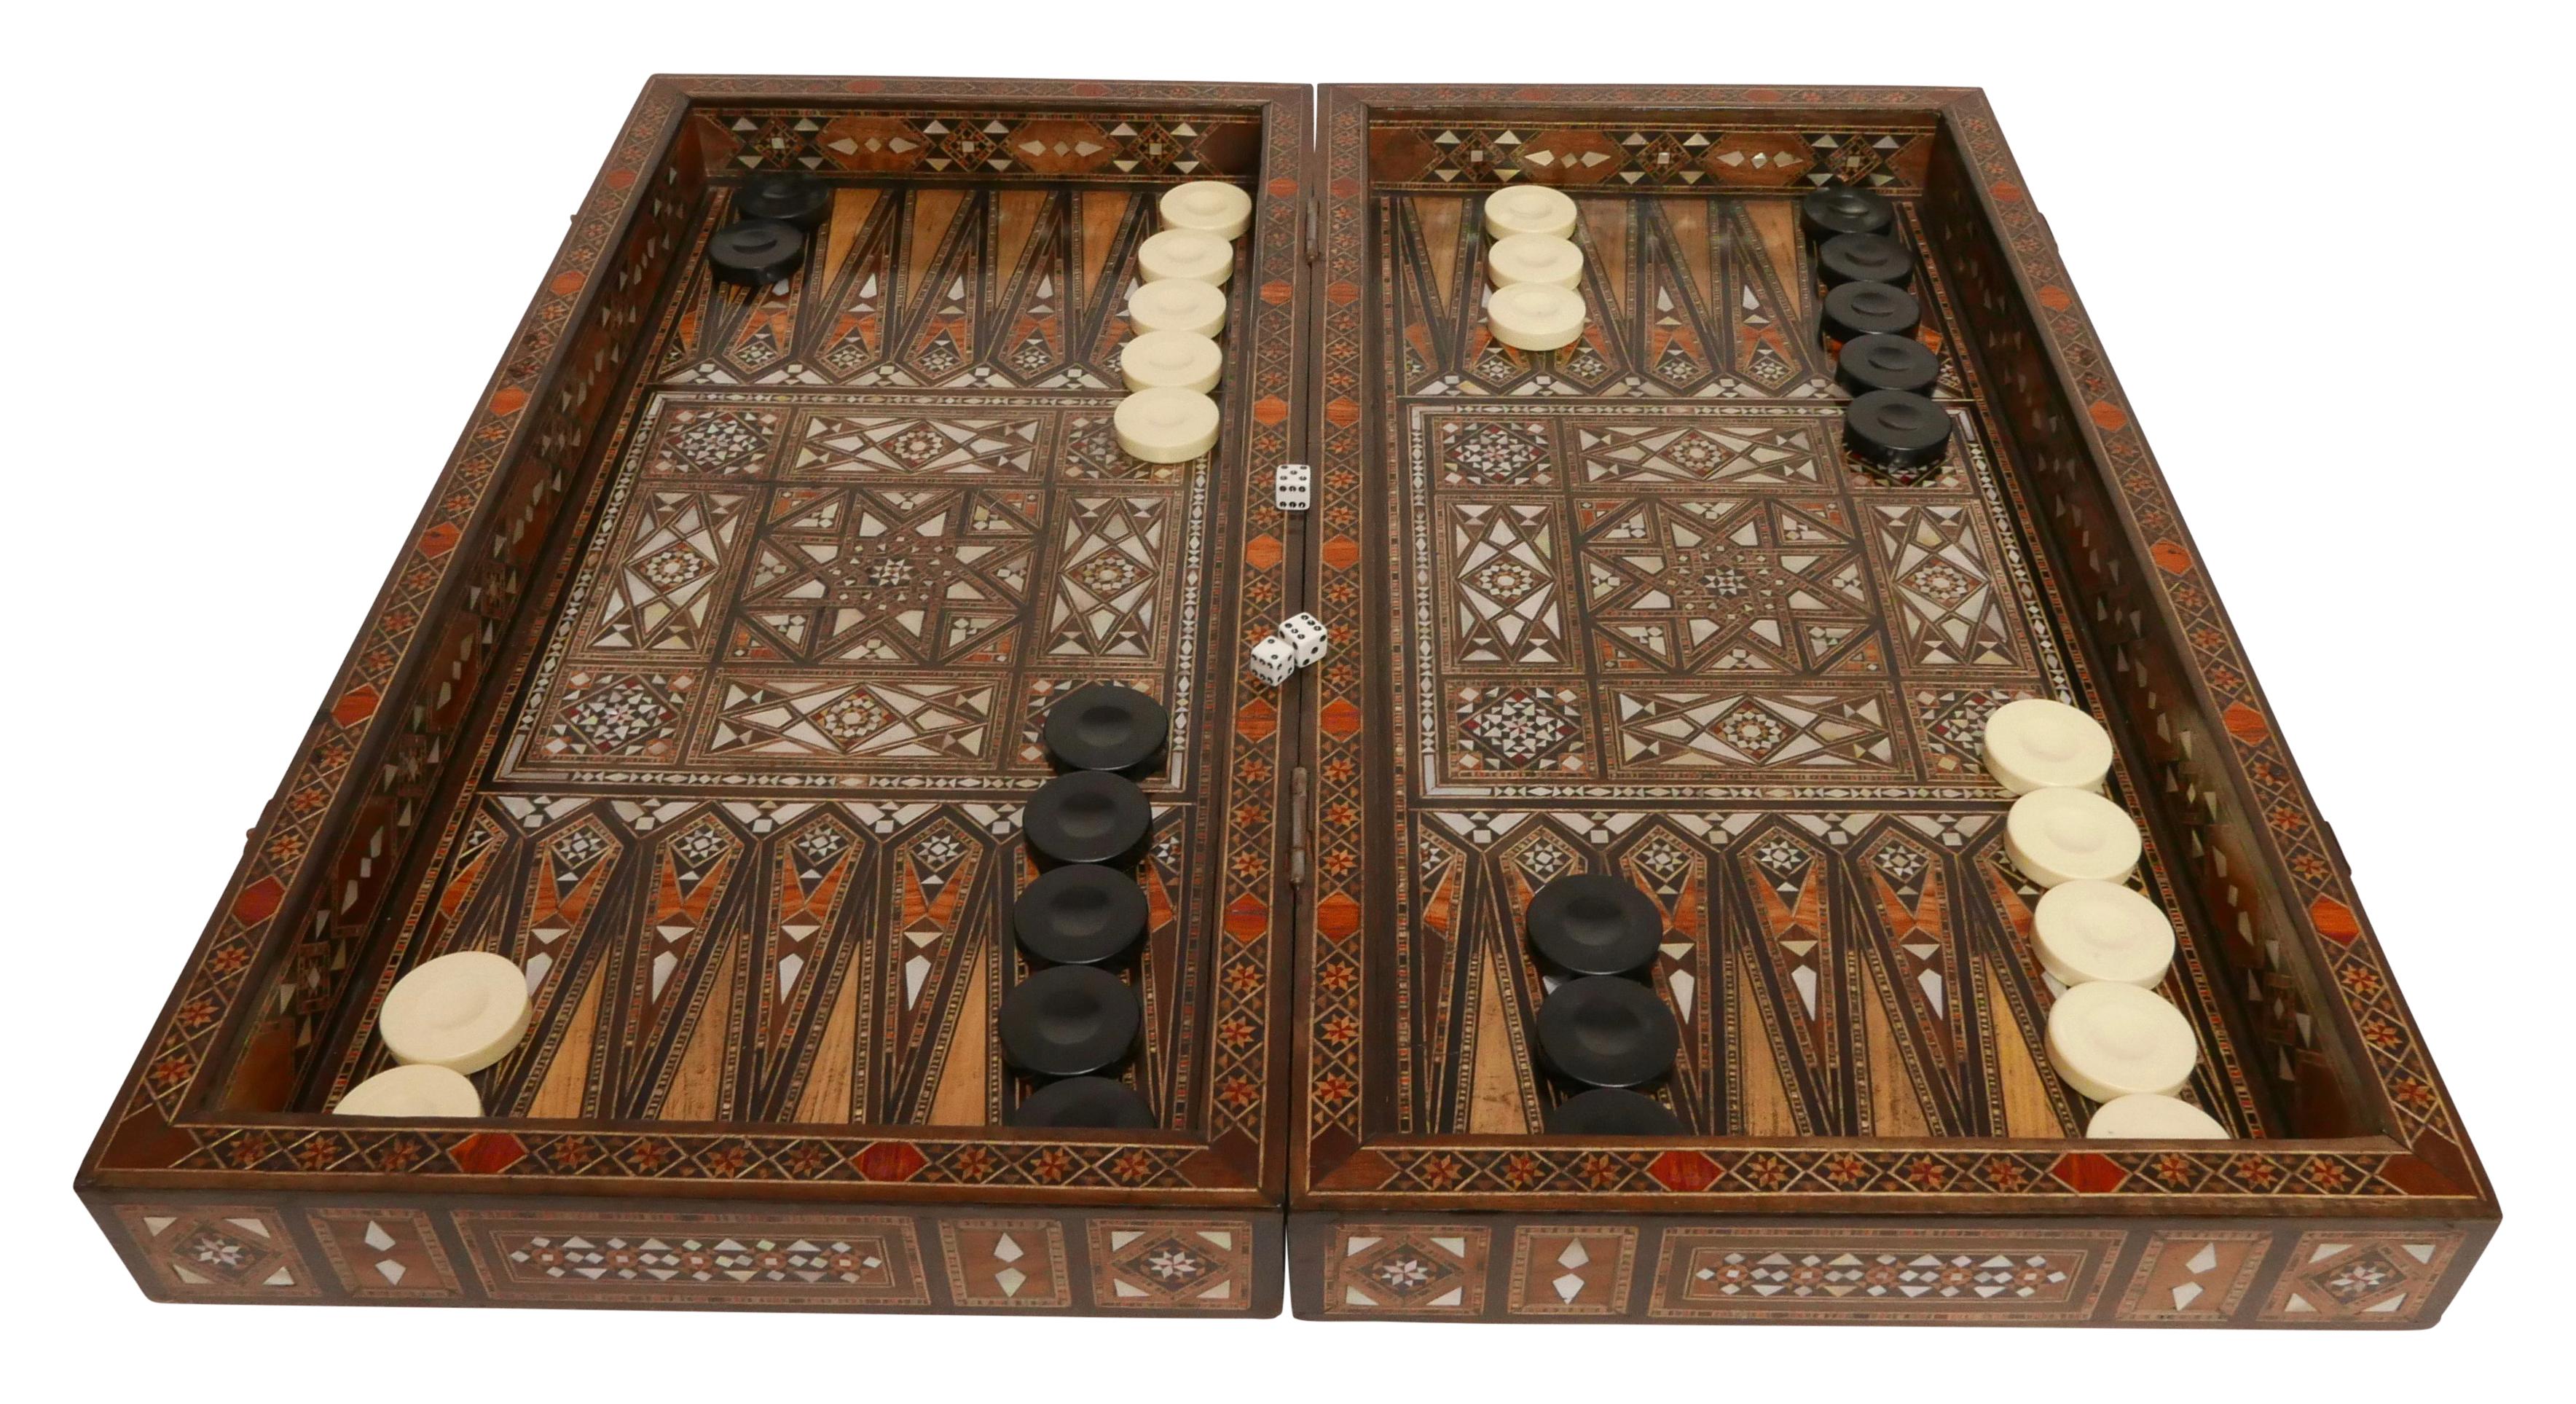 Beautifully handcrafted backgammon and chess game box with intricate marquetry of mixed woods and mother of pearl inlay in a Moorish geometric pattern.
Inlays of olive, rosewood, mahogany, walnut and lemon wood.
When closed the box measures 3.5